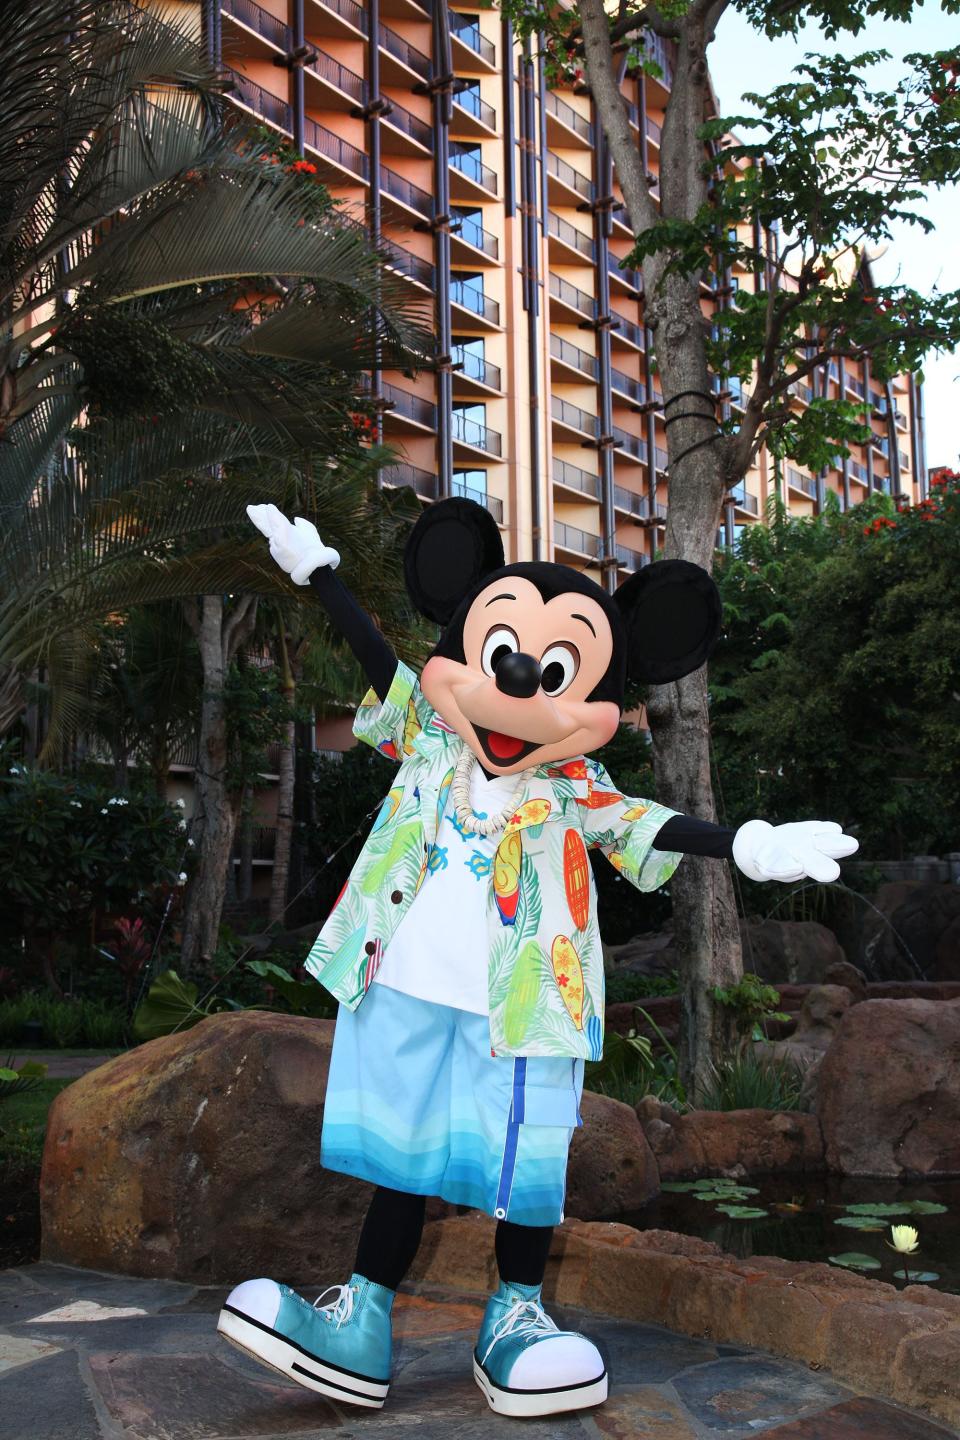 Mickey Mouse opens his arms wide at Aulani, A Disney Resort & Spa. The DVC property there is called Aulani A Disney Vacation Club Resort in Hawaiʻi.